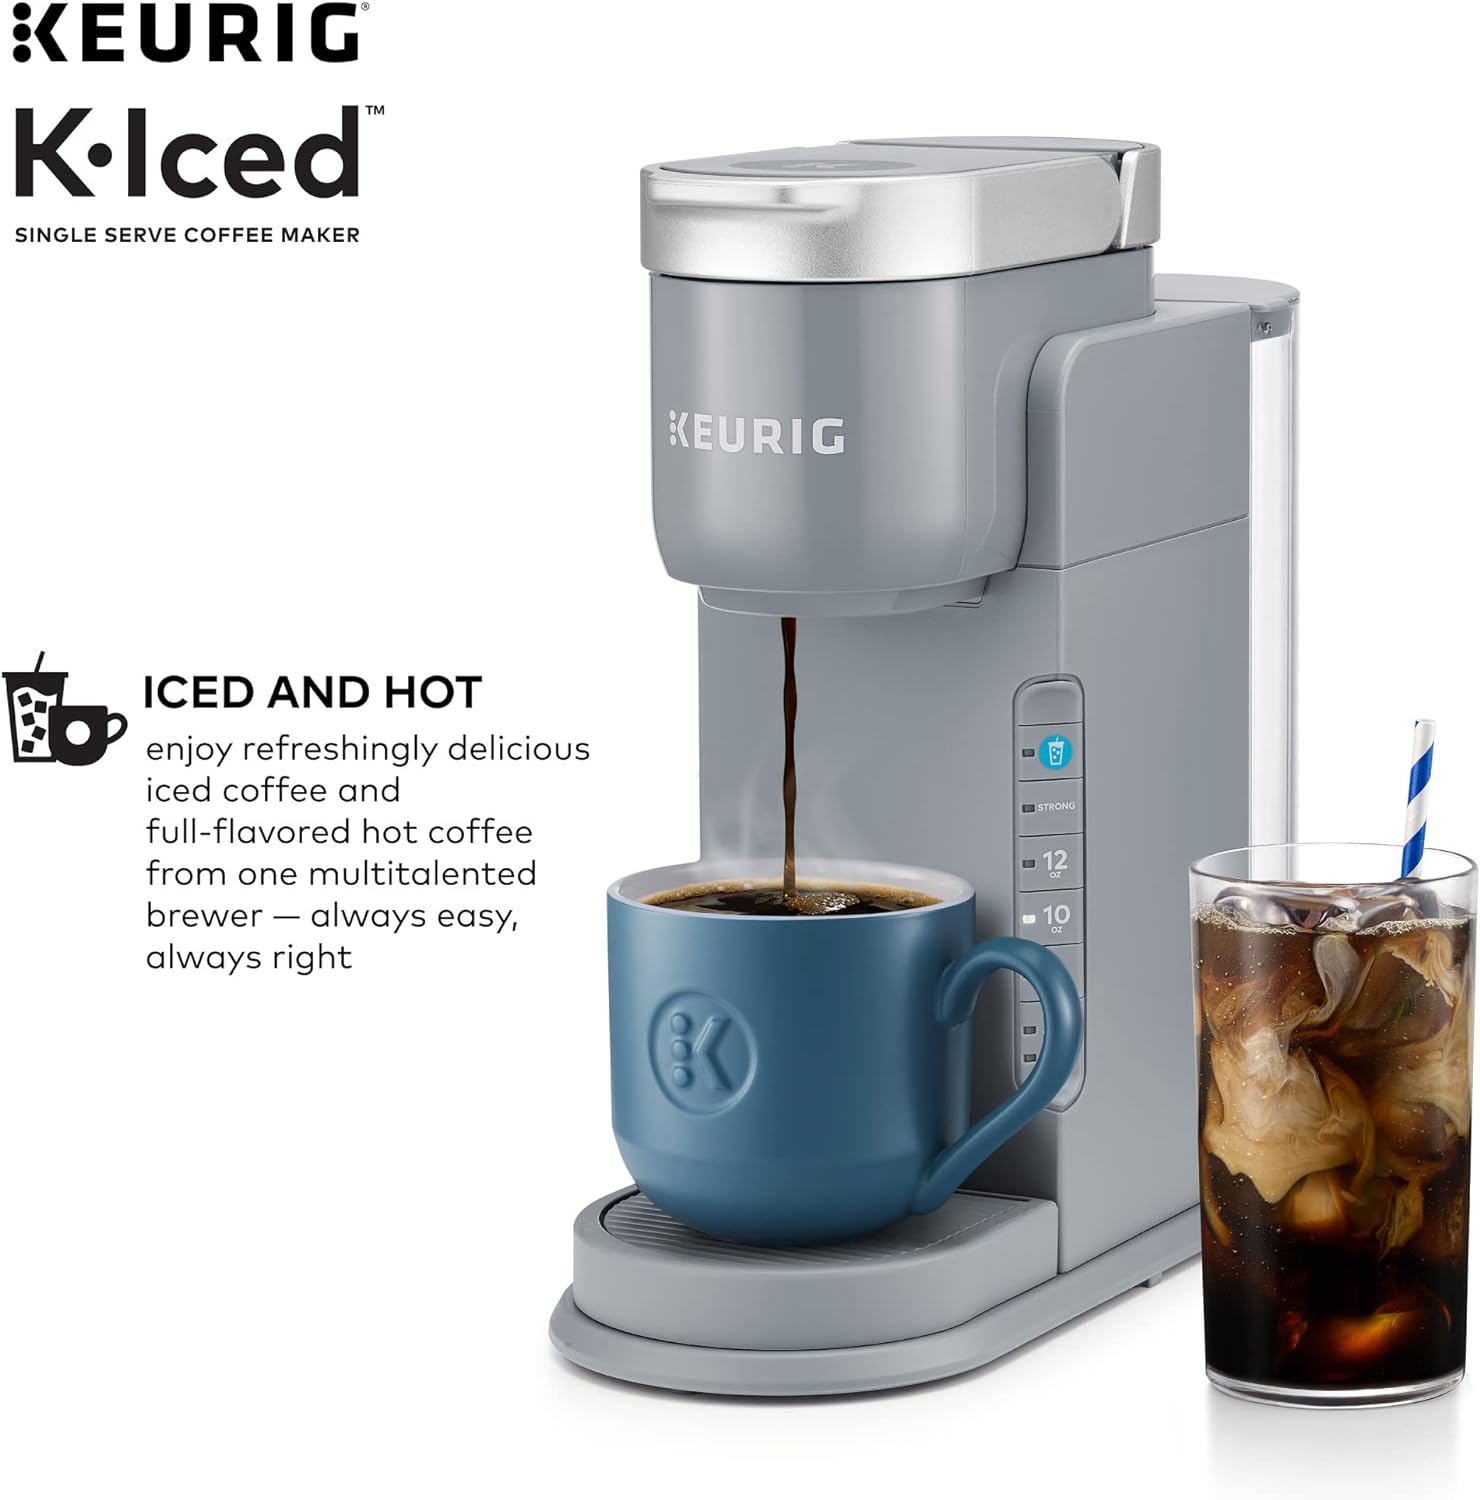 The Ultimate Companion for Coffee Lovers: A Deep Dive into the Keurig K-Iced Single Serve Coffee Maker